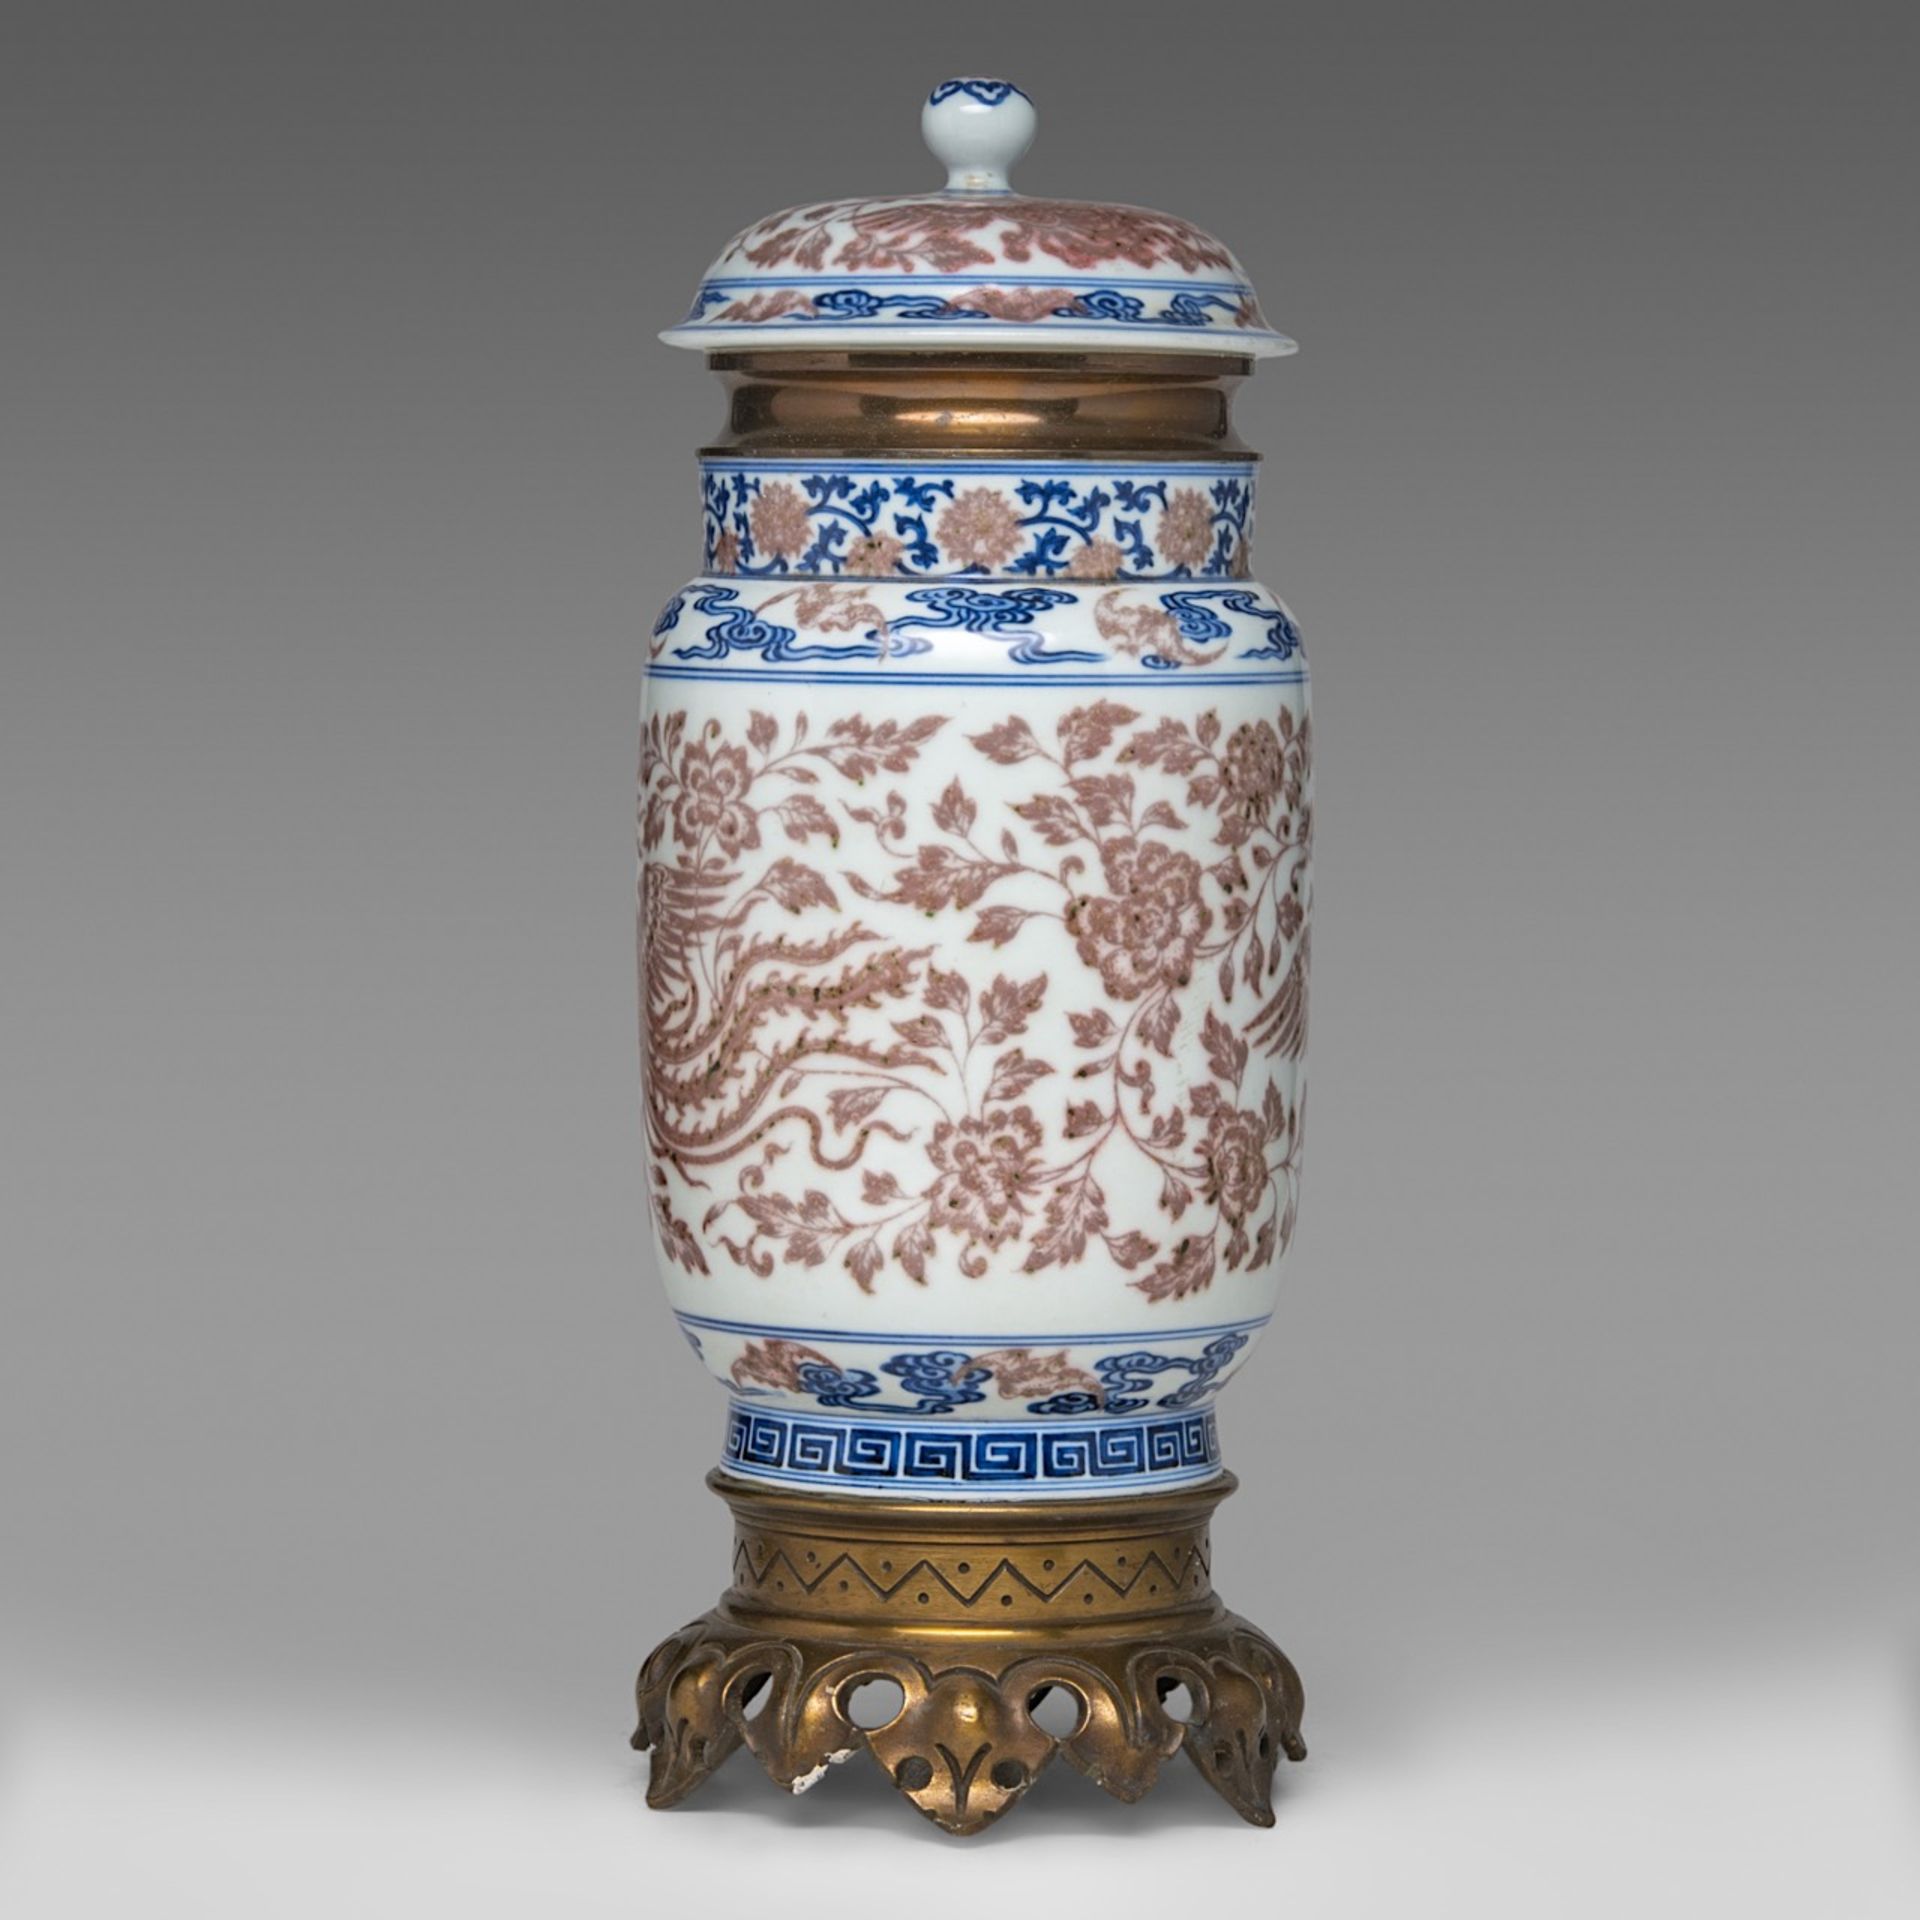 A Chinese copper-red and underglaze blue 'Phoenixes amongst Peonies' albarello lantern vase, with a - Image 4 of 6